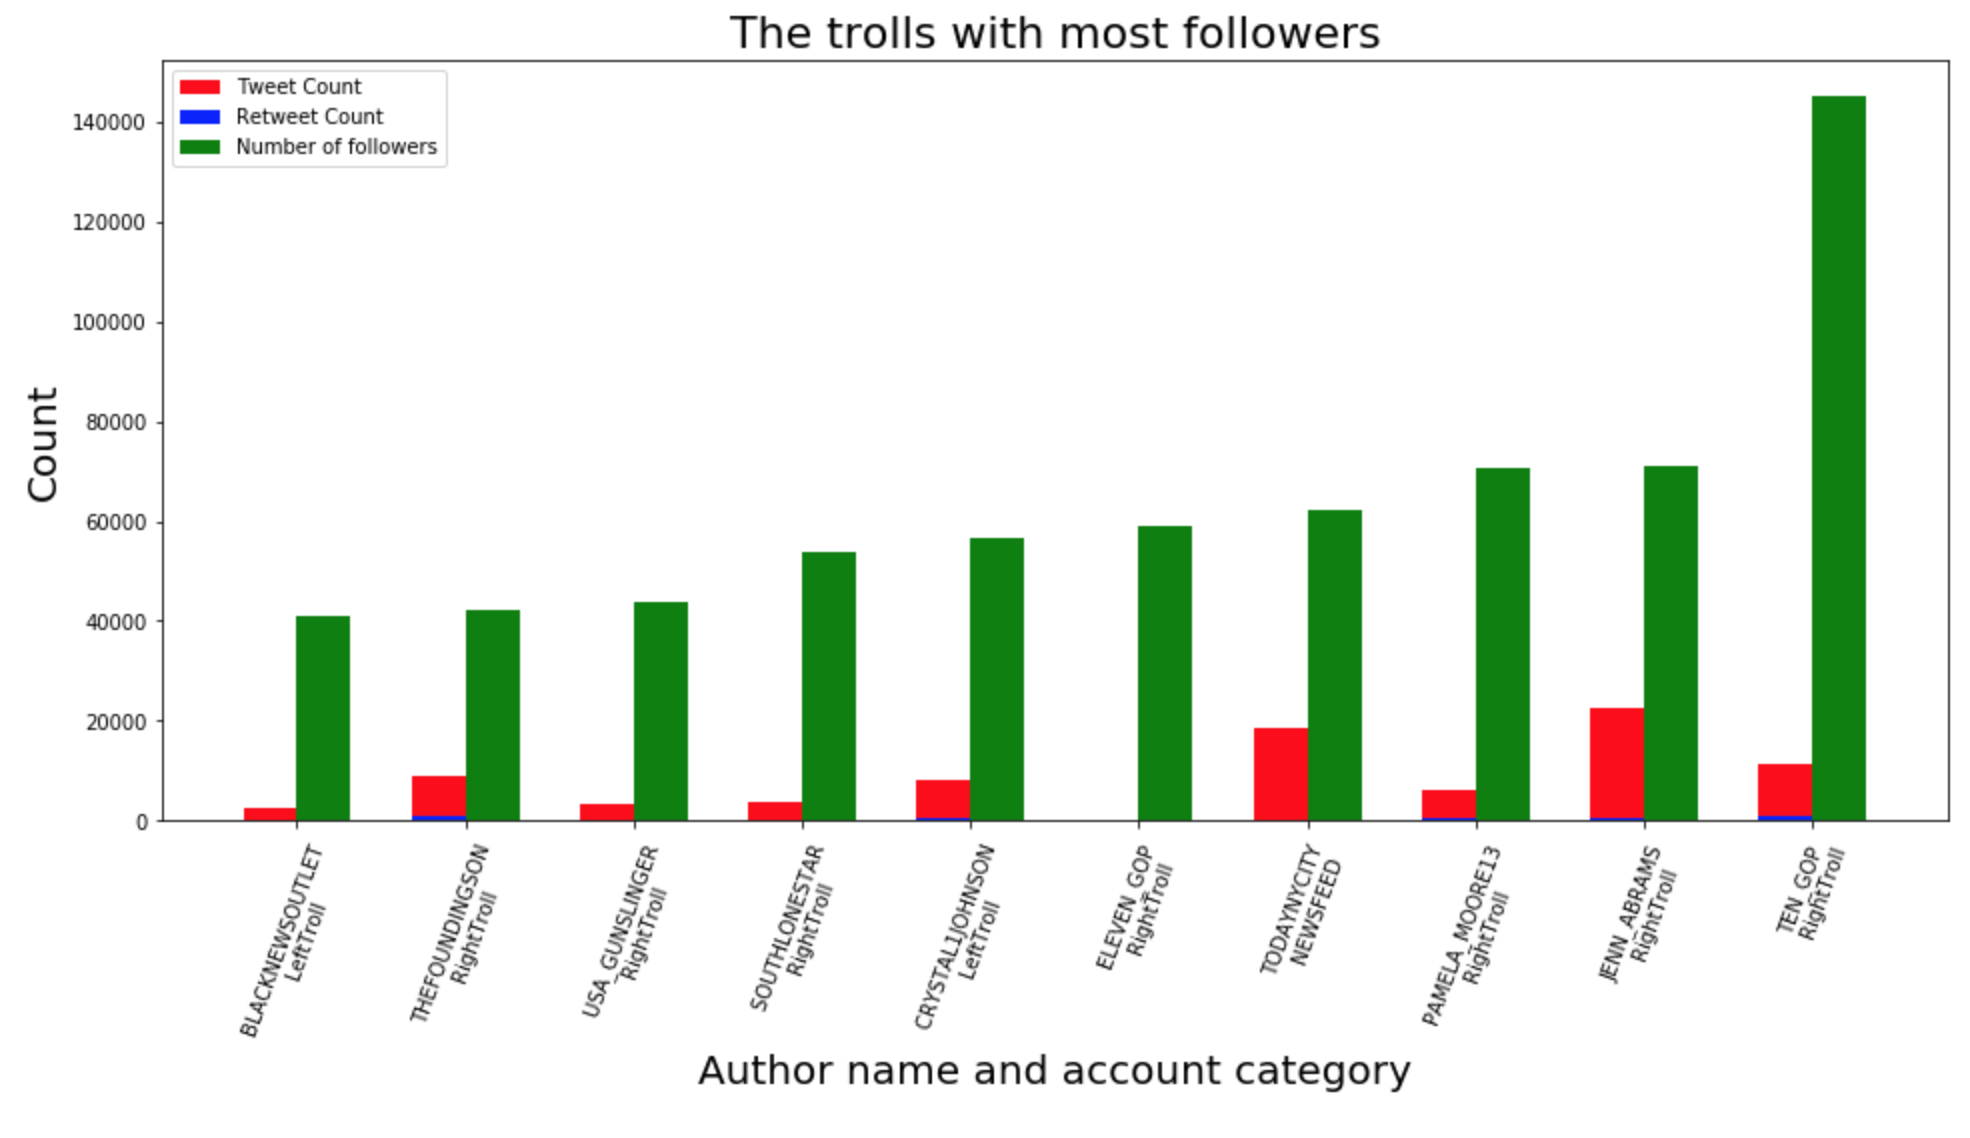 Users with most followers